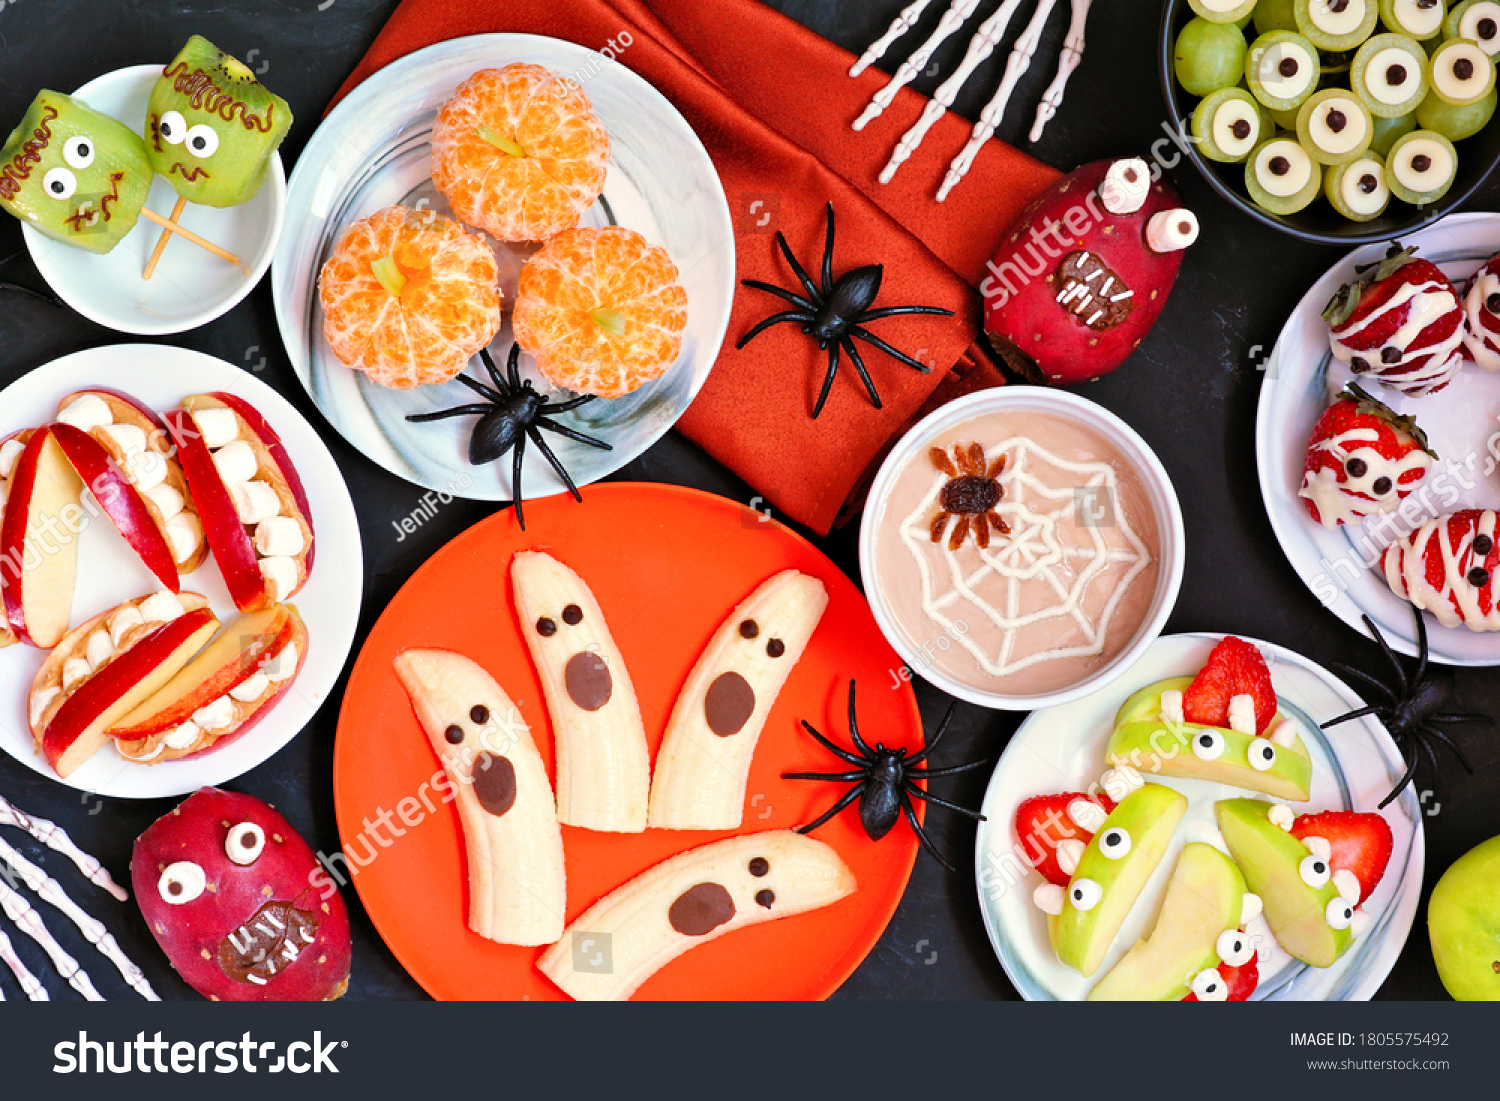 Healthy Halloween fruit snacks. Assorted fun, spooky treats. Top view table scene over a black stone background. #1805575492